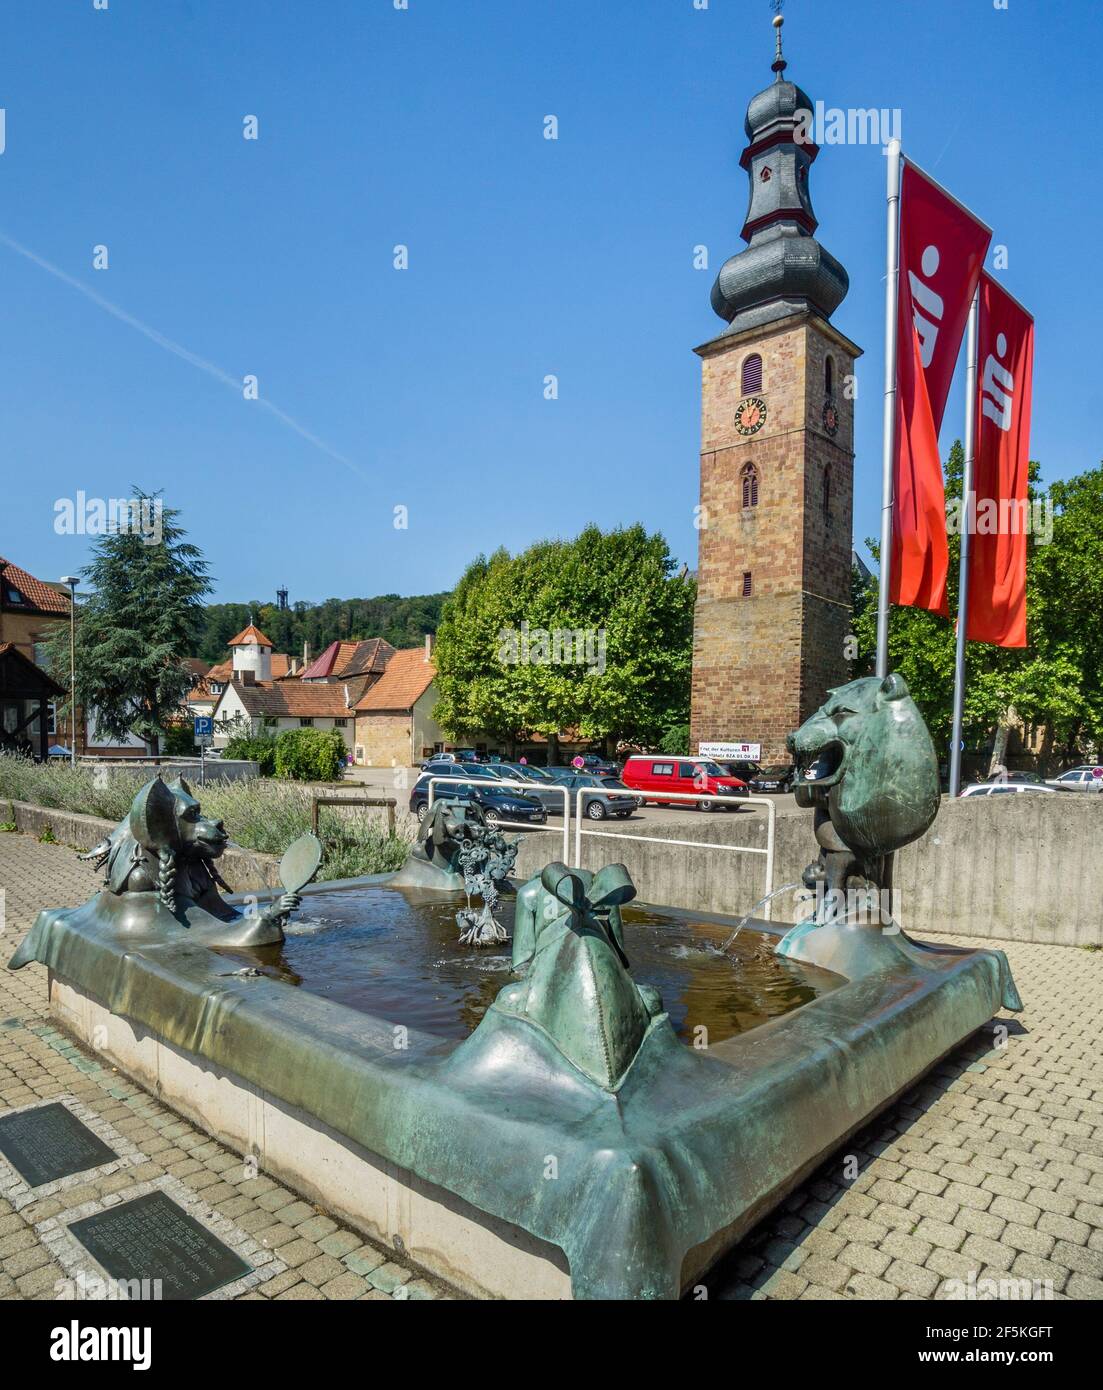 wine fountain at Bad Bergzabern on the German Wine Route is metaphorically pointing out the virtues and vices of wine drinking, Rhineland-Palatinate, Stock Photo